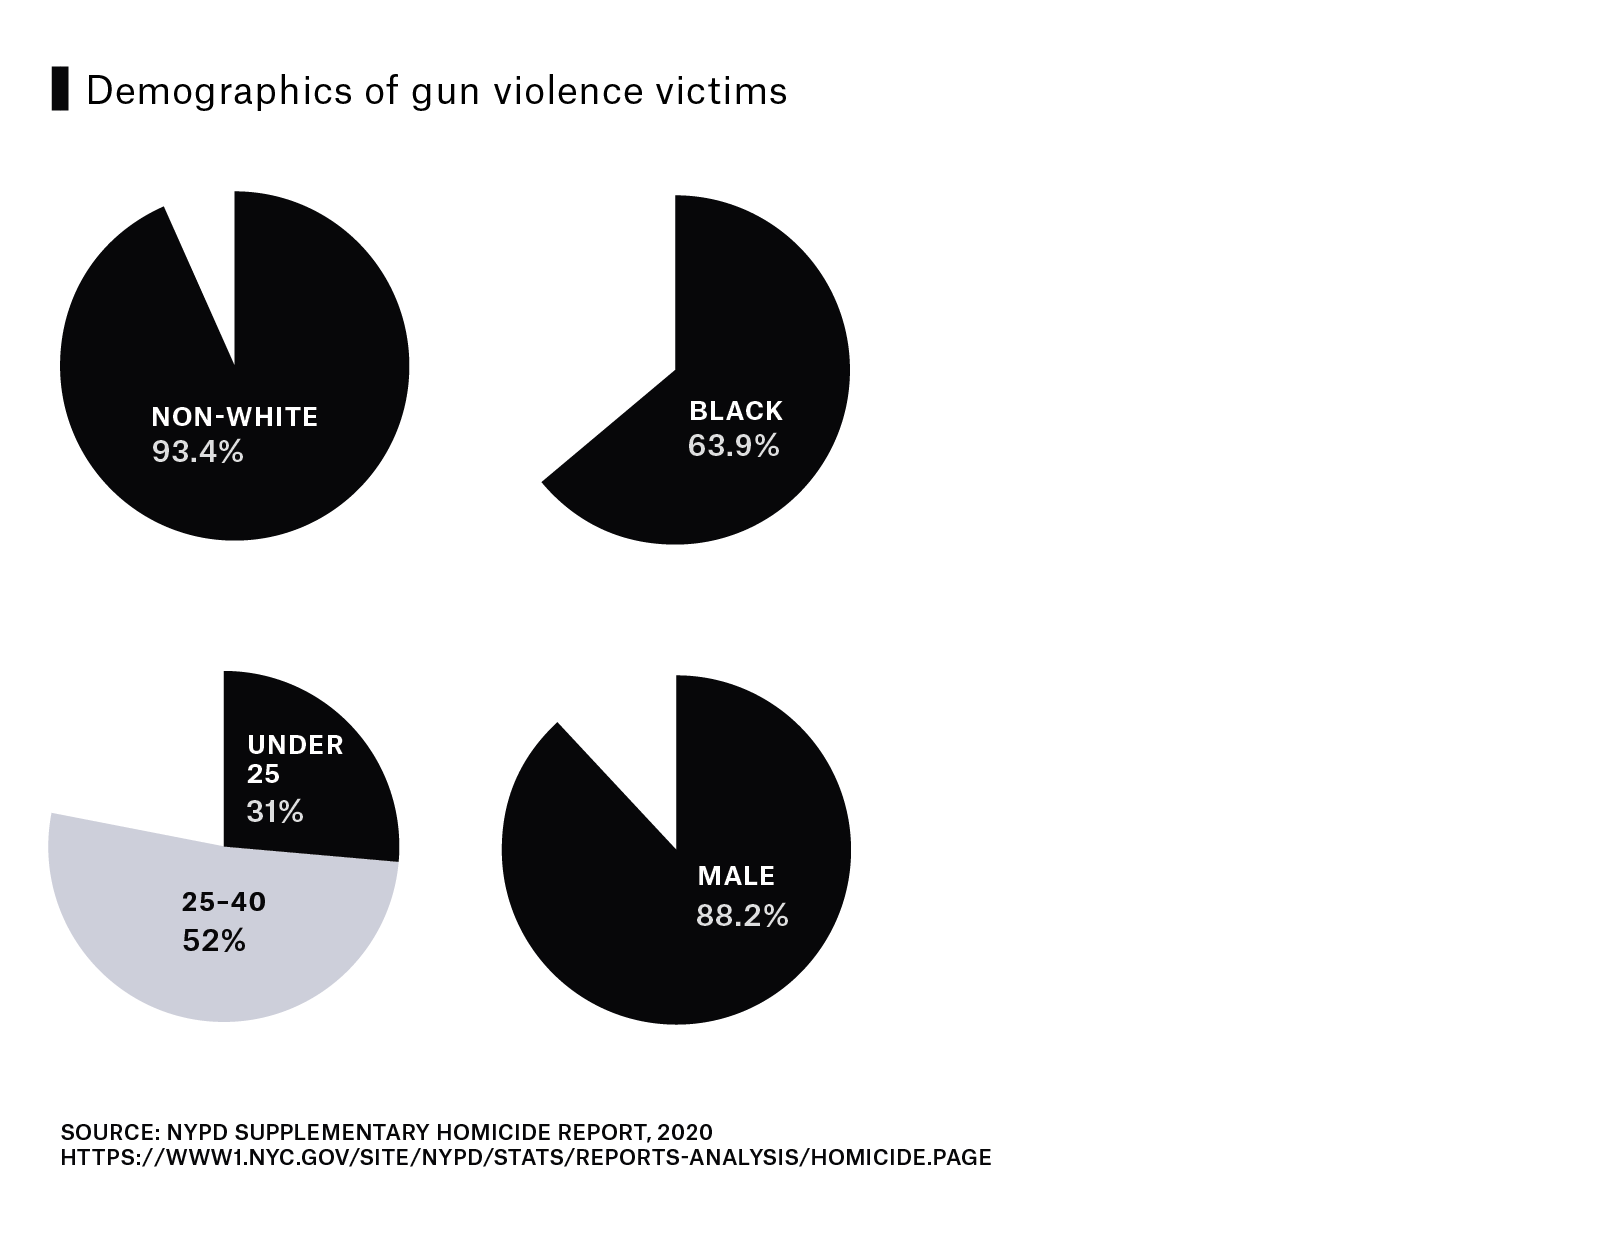 4 side-by-side pie charts compare the demographics of gun violence victims. Non-white victims are 93.4%. Black victims are 63.9%. Male victims are 88.2%. In terms of age, 52% are under 25 and 31% are 25 to 40.